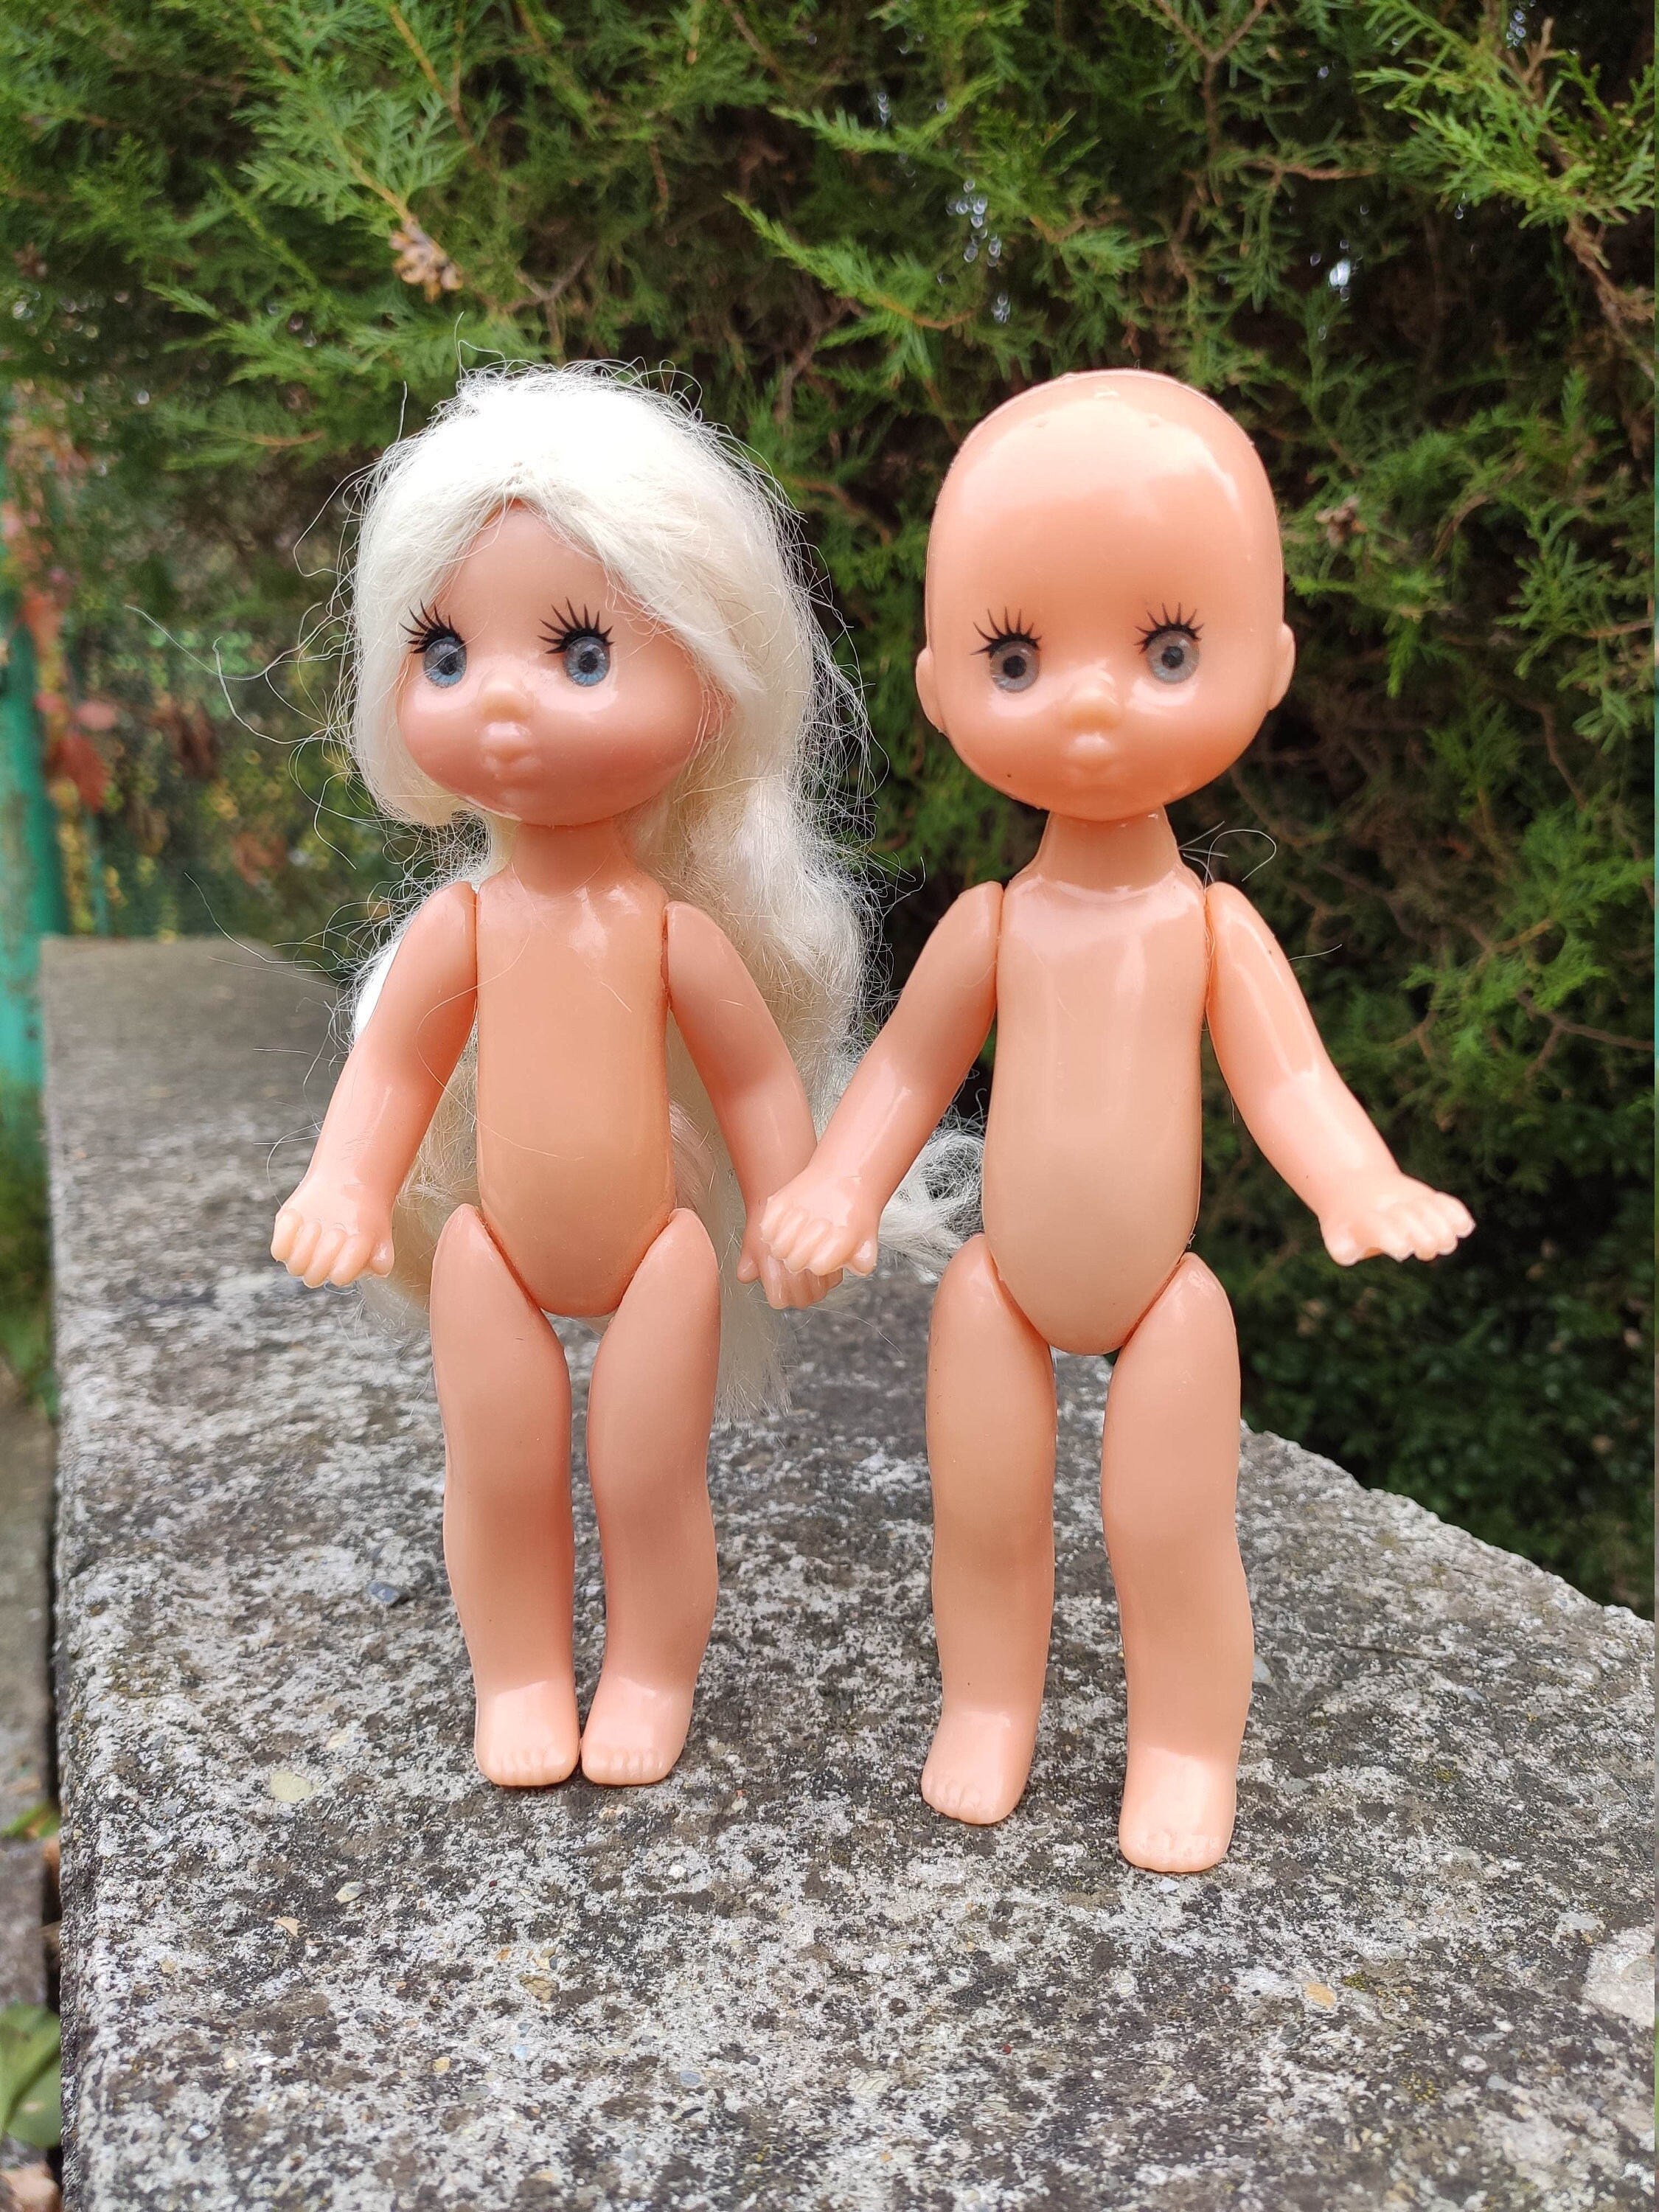 VINTAGE TOY DOLL BROTHER AND SISTER SAILORS RUBBER ROMANIA SOVIET CCCP ERA